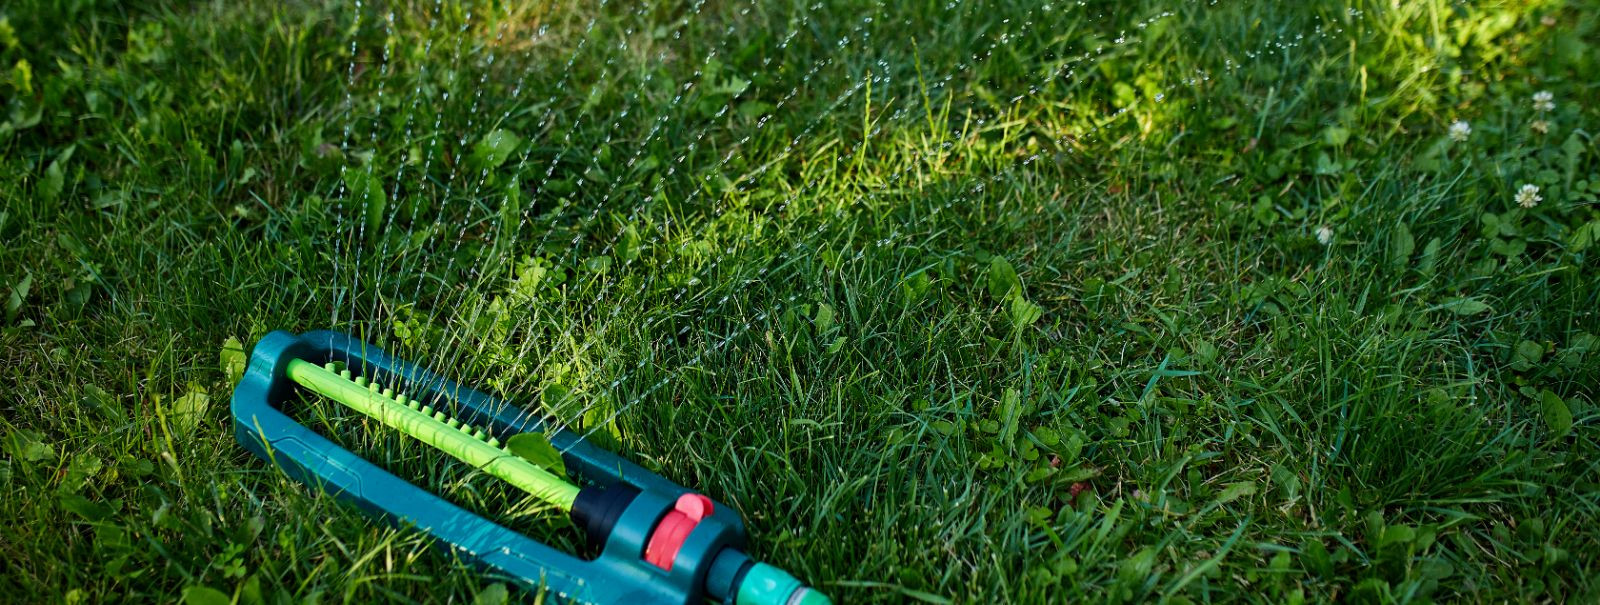 As homeowners and private clients in urban and suburban areas, you understand the value of a well-maintained living space. However, traditional lawn care method